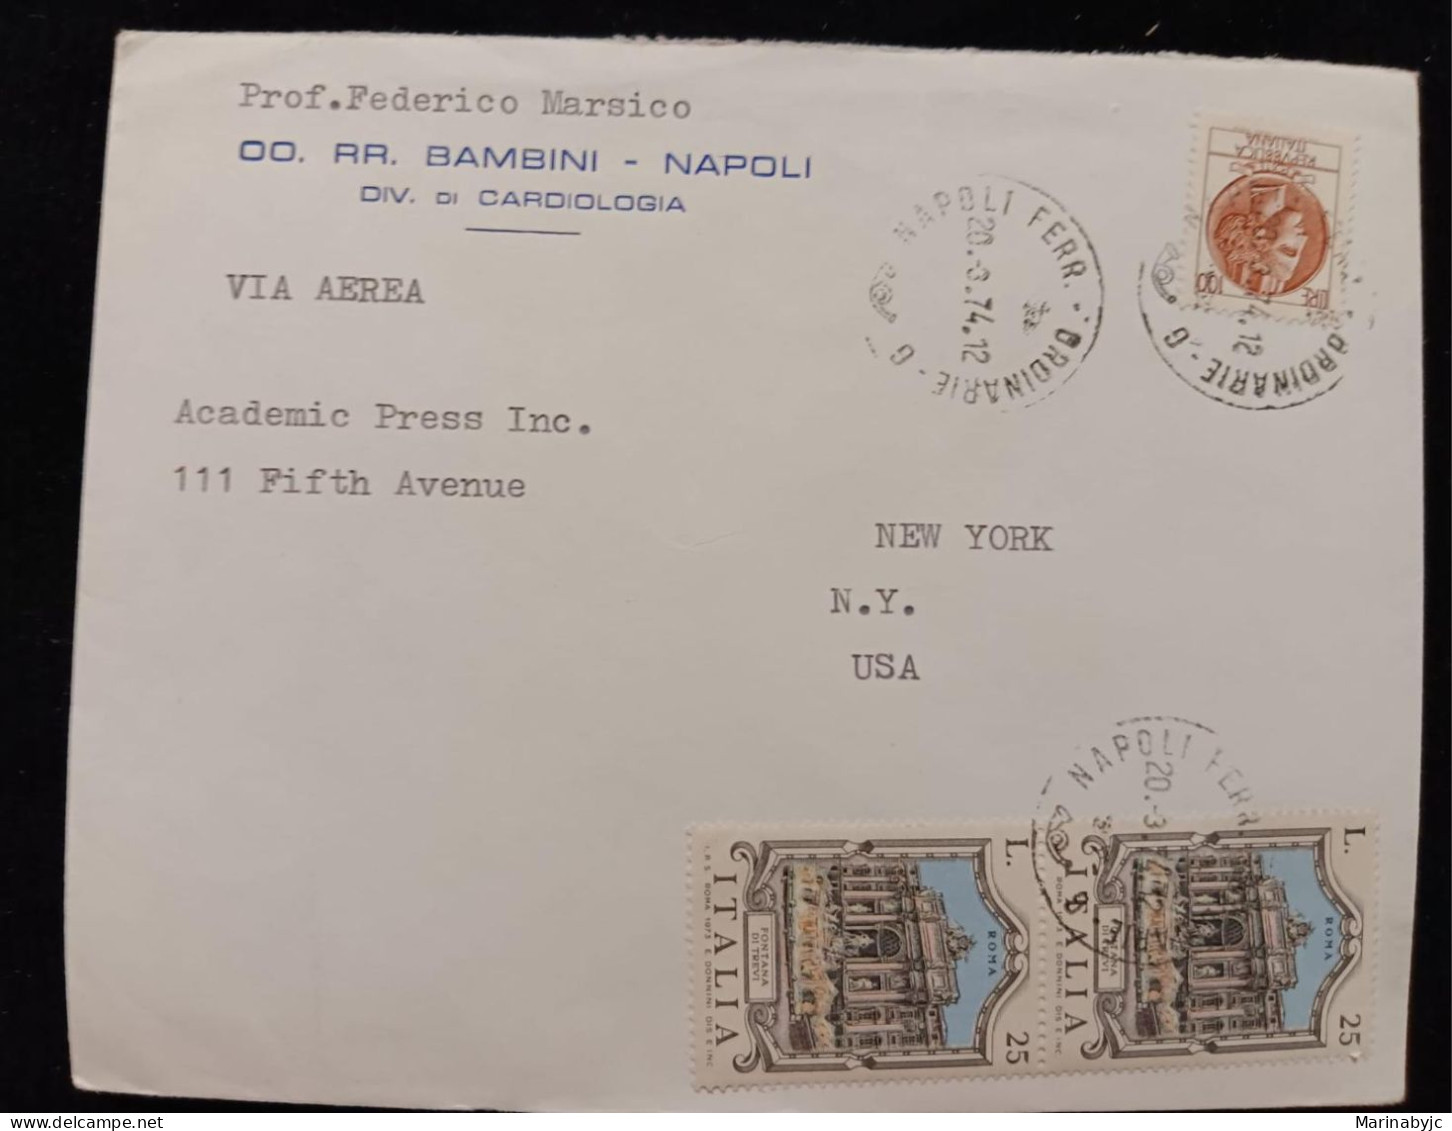 C) 1974. ITALY. AIRMAIL ENVELOPE SENT TO USA. MULTIPLE STAMPS. XF - Altri - Europa